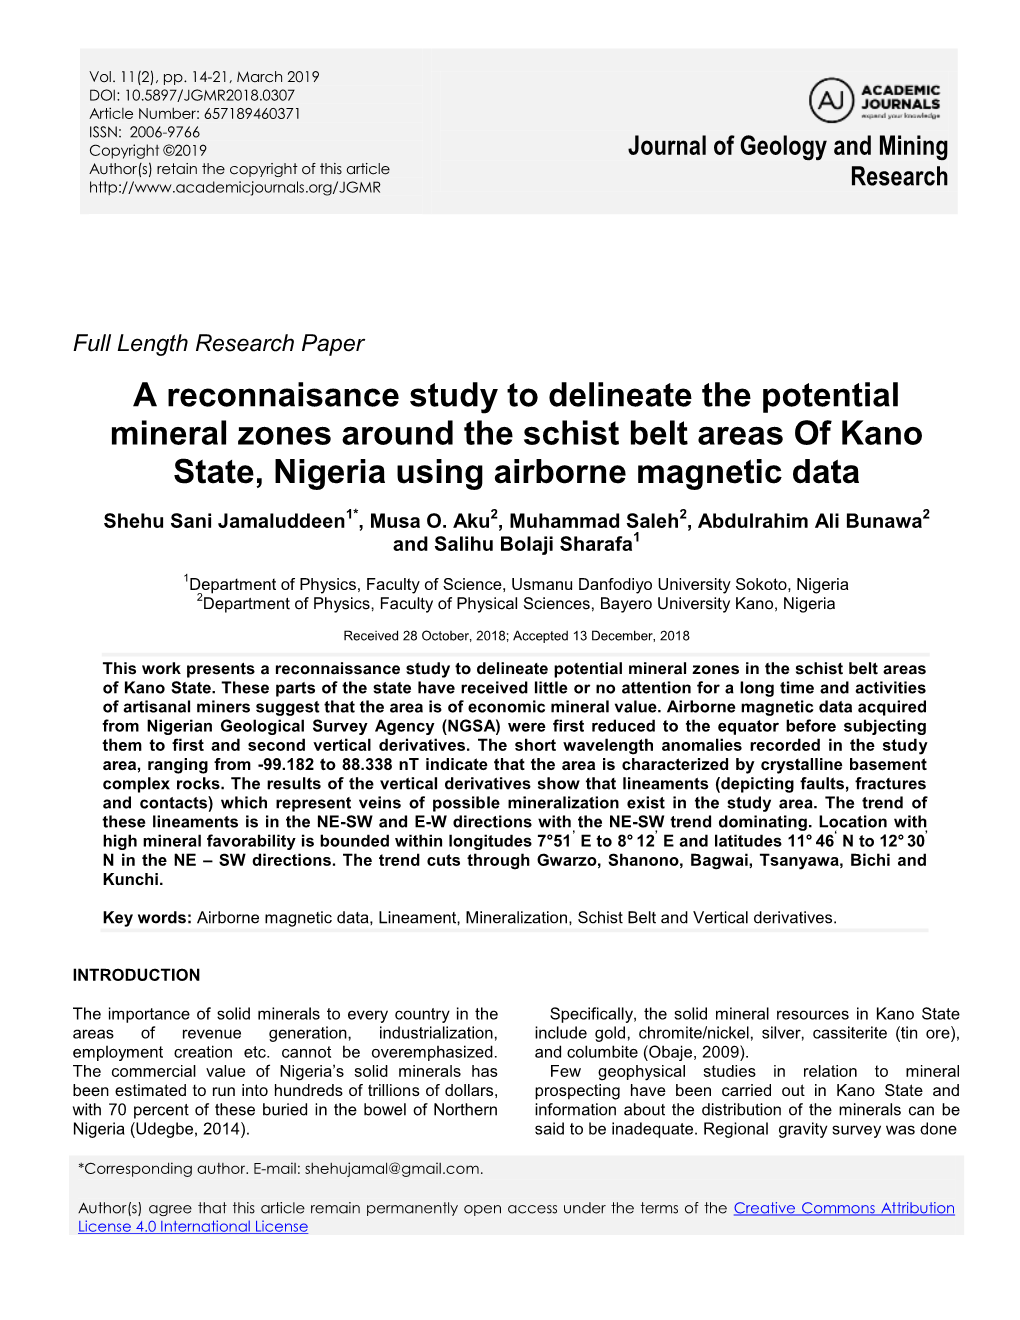 A Reconnaisance Study to Delineate the Potential Mineral Zones Around the Schist Belt Areas of Kano State, Nigeria Using Airborne Magnetic Data